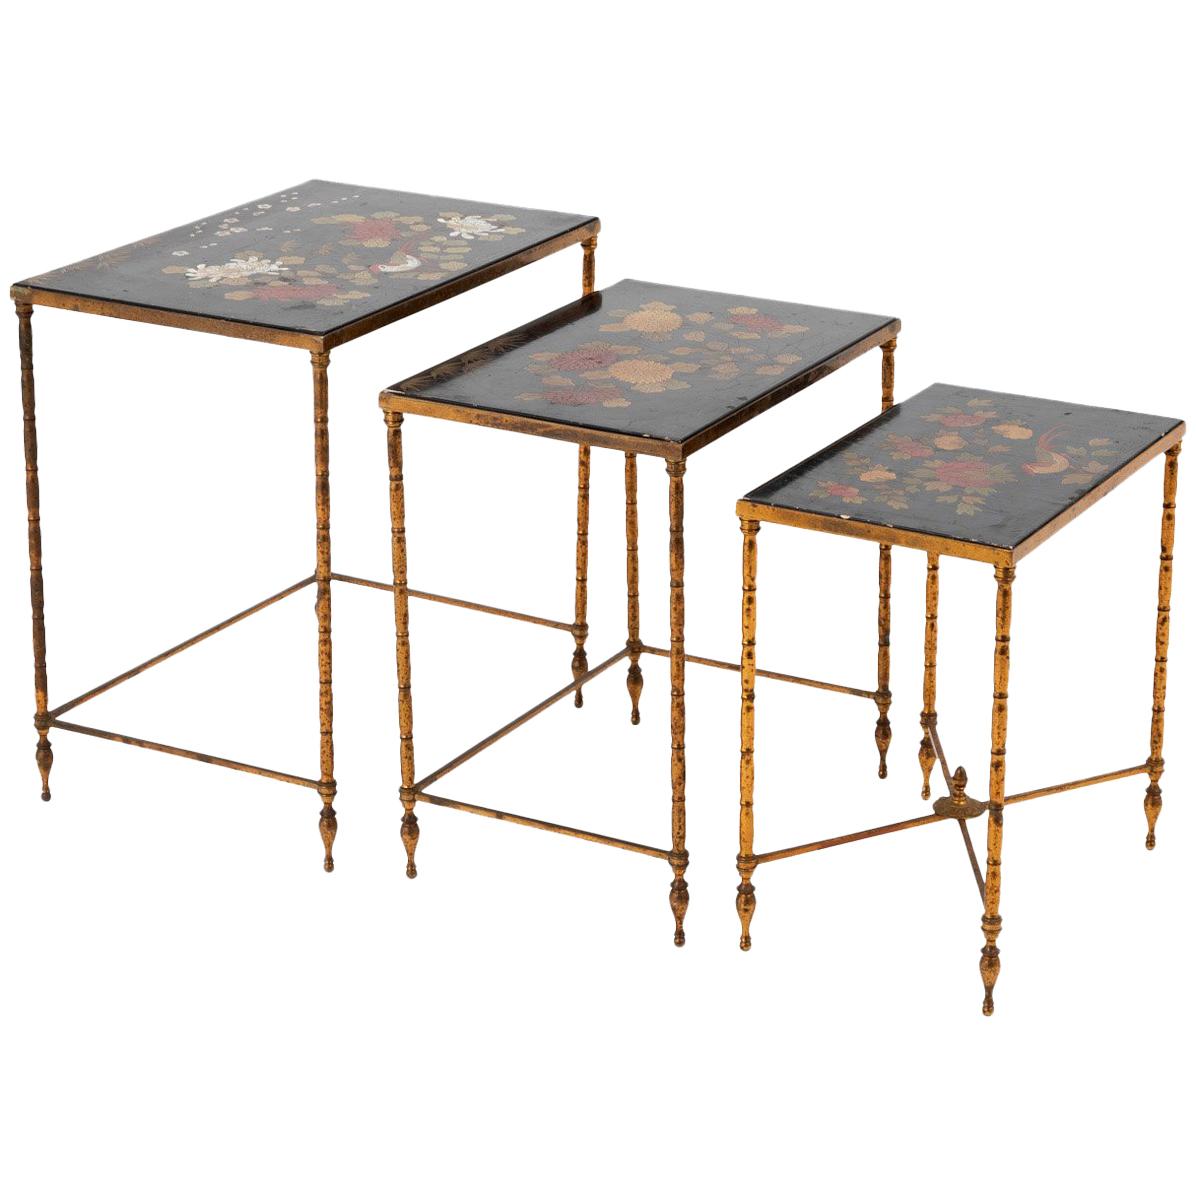 Maison Baguès, Nested Tables in Flowered Black Lacquer, 1950s